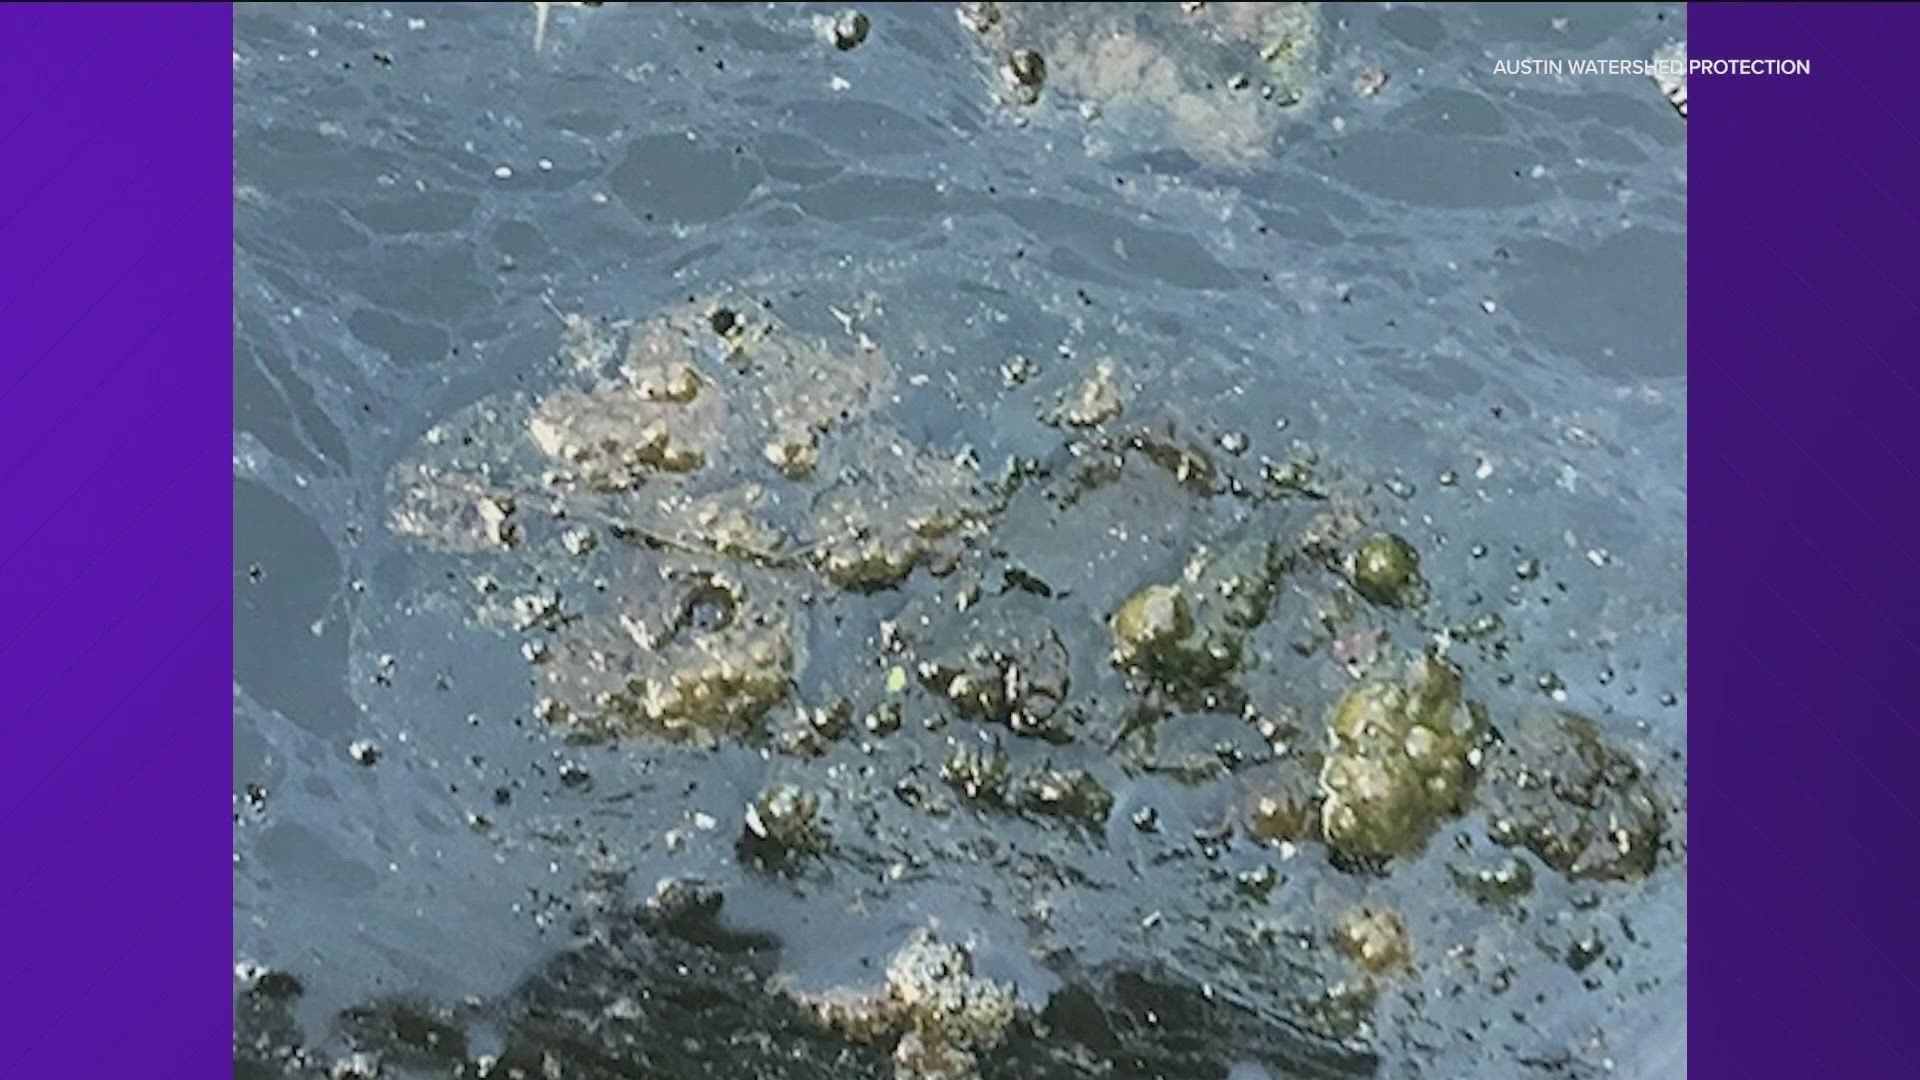 The deadly blue-green algae is back in some Austin waterways.